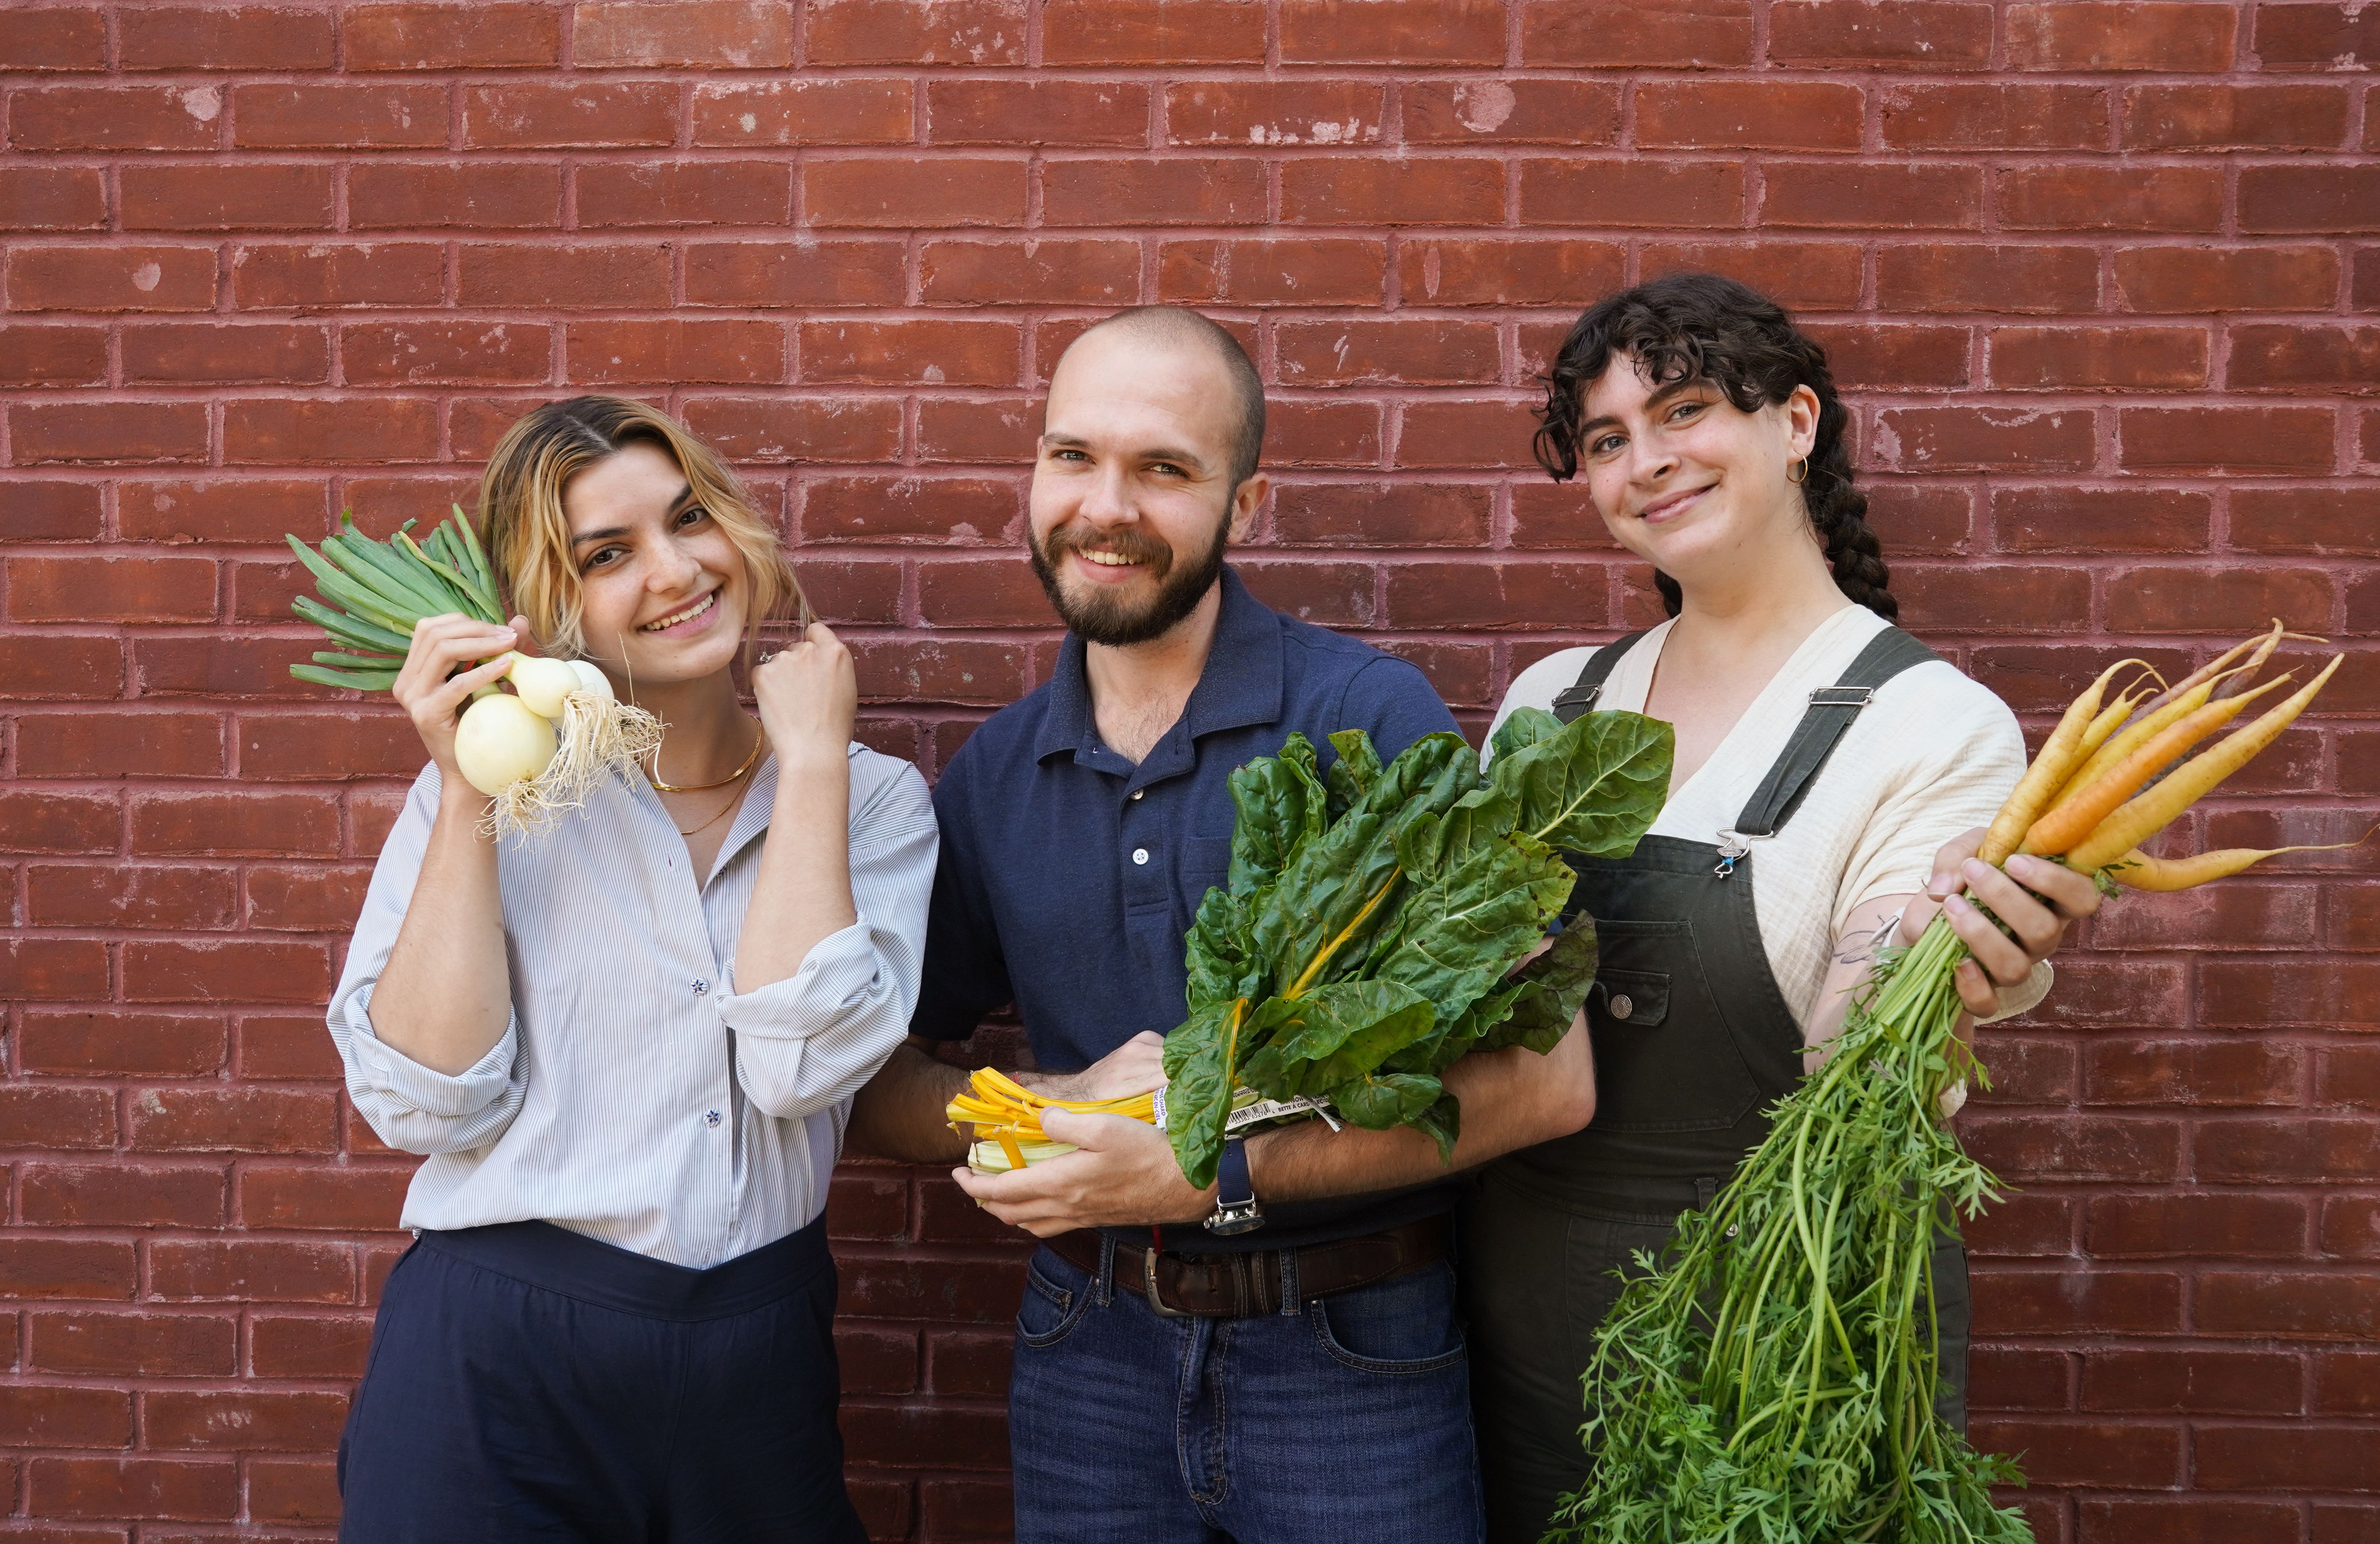 Three people pose smiling in front of a brick wall holding fresh vegtables.